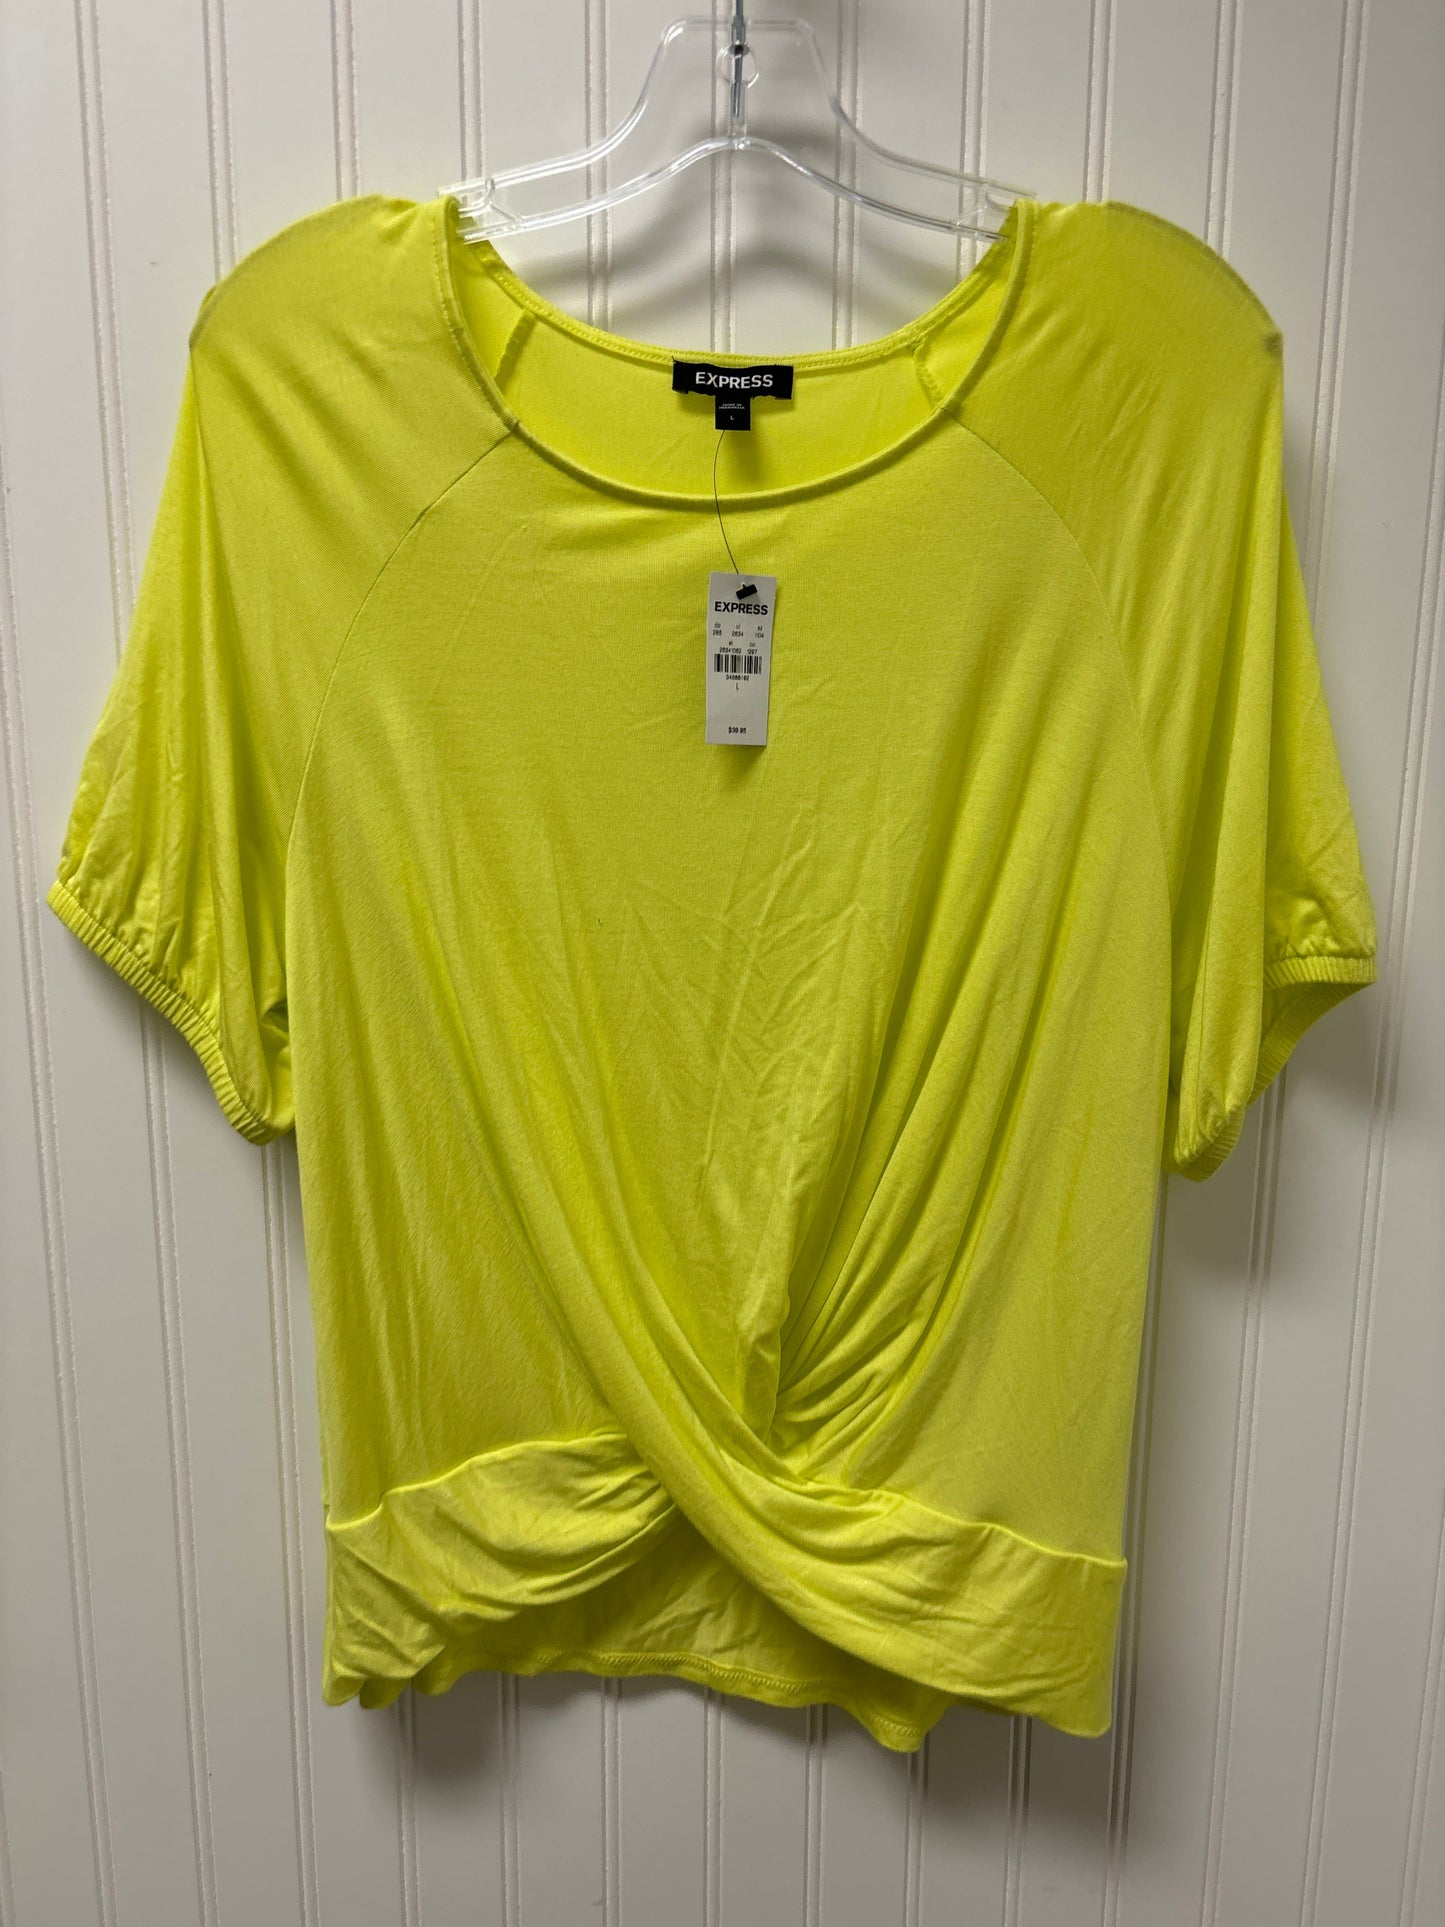 Yellow Top Short Sleeve Express, Size L